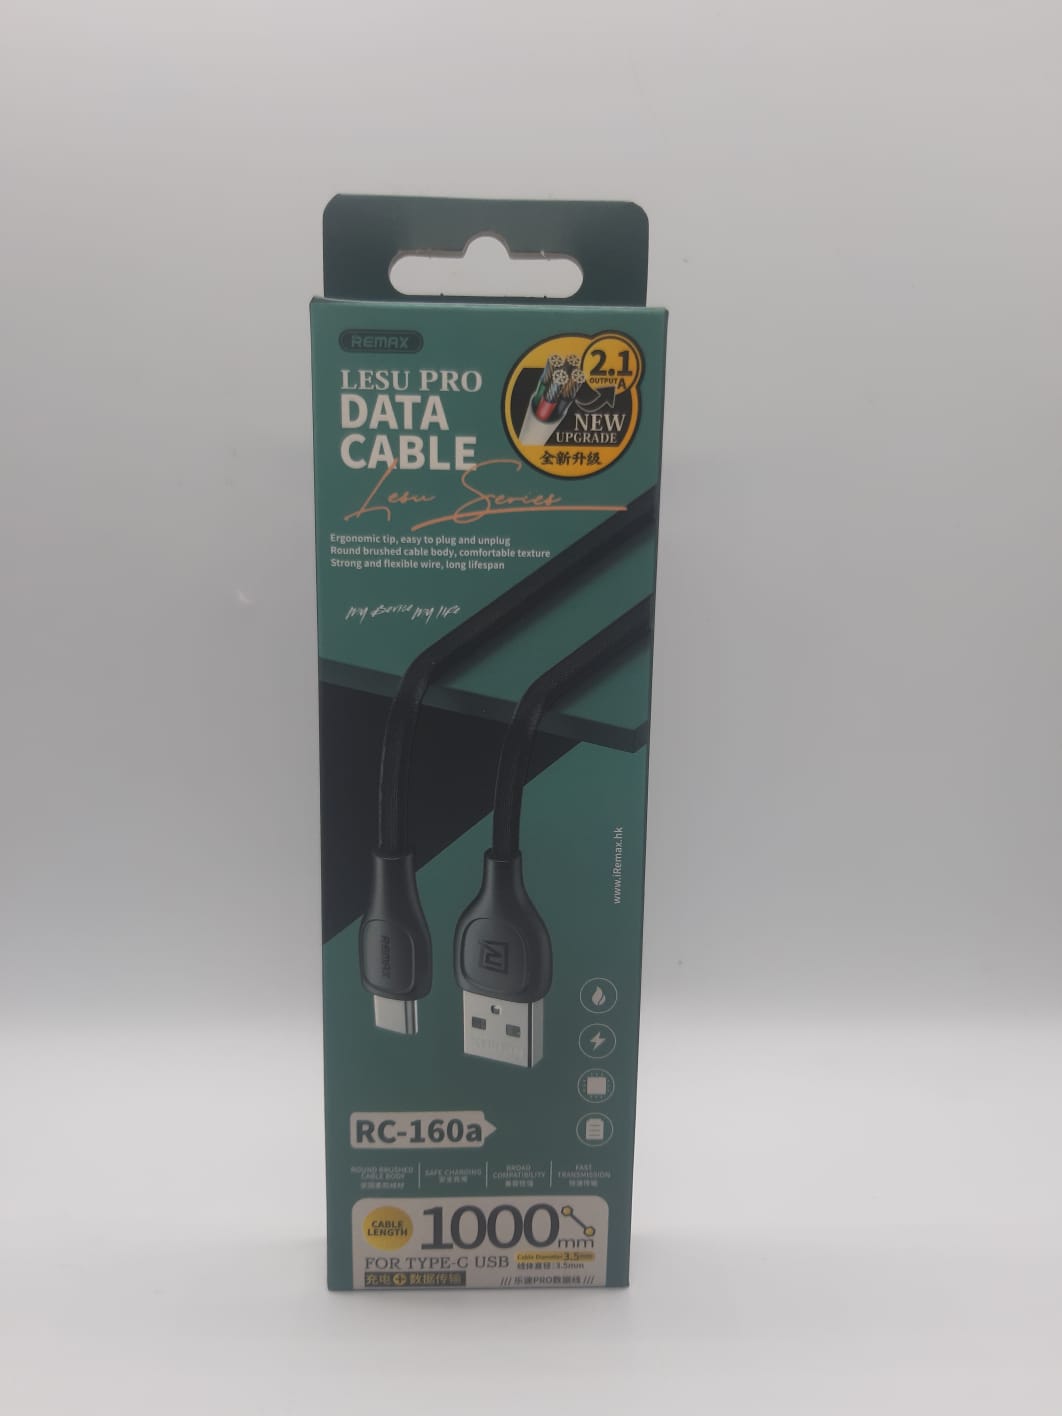 REMAX-RC-160A LESU PRO SERIES DATA CABLE -TYPE-C